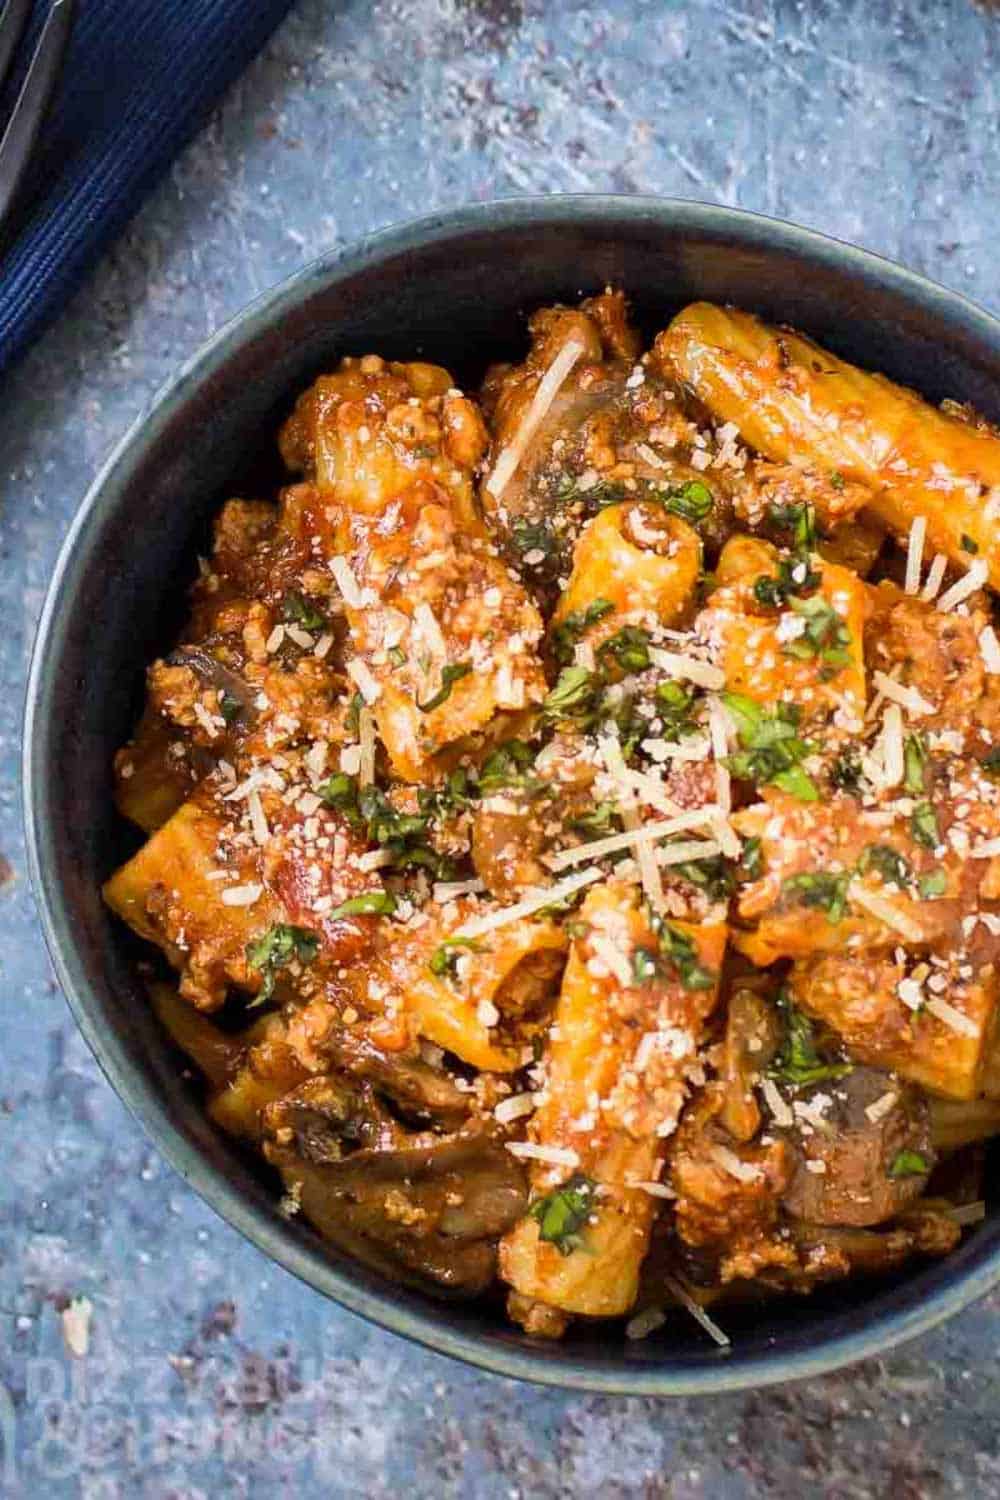 Overhead shot of rigatoni garnished with cheese and herbs in a blue bowl on a blue speckled surface with a blue cloth on the side.